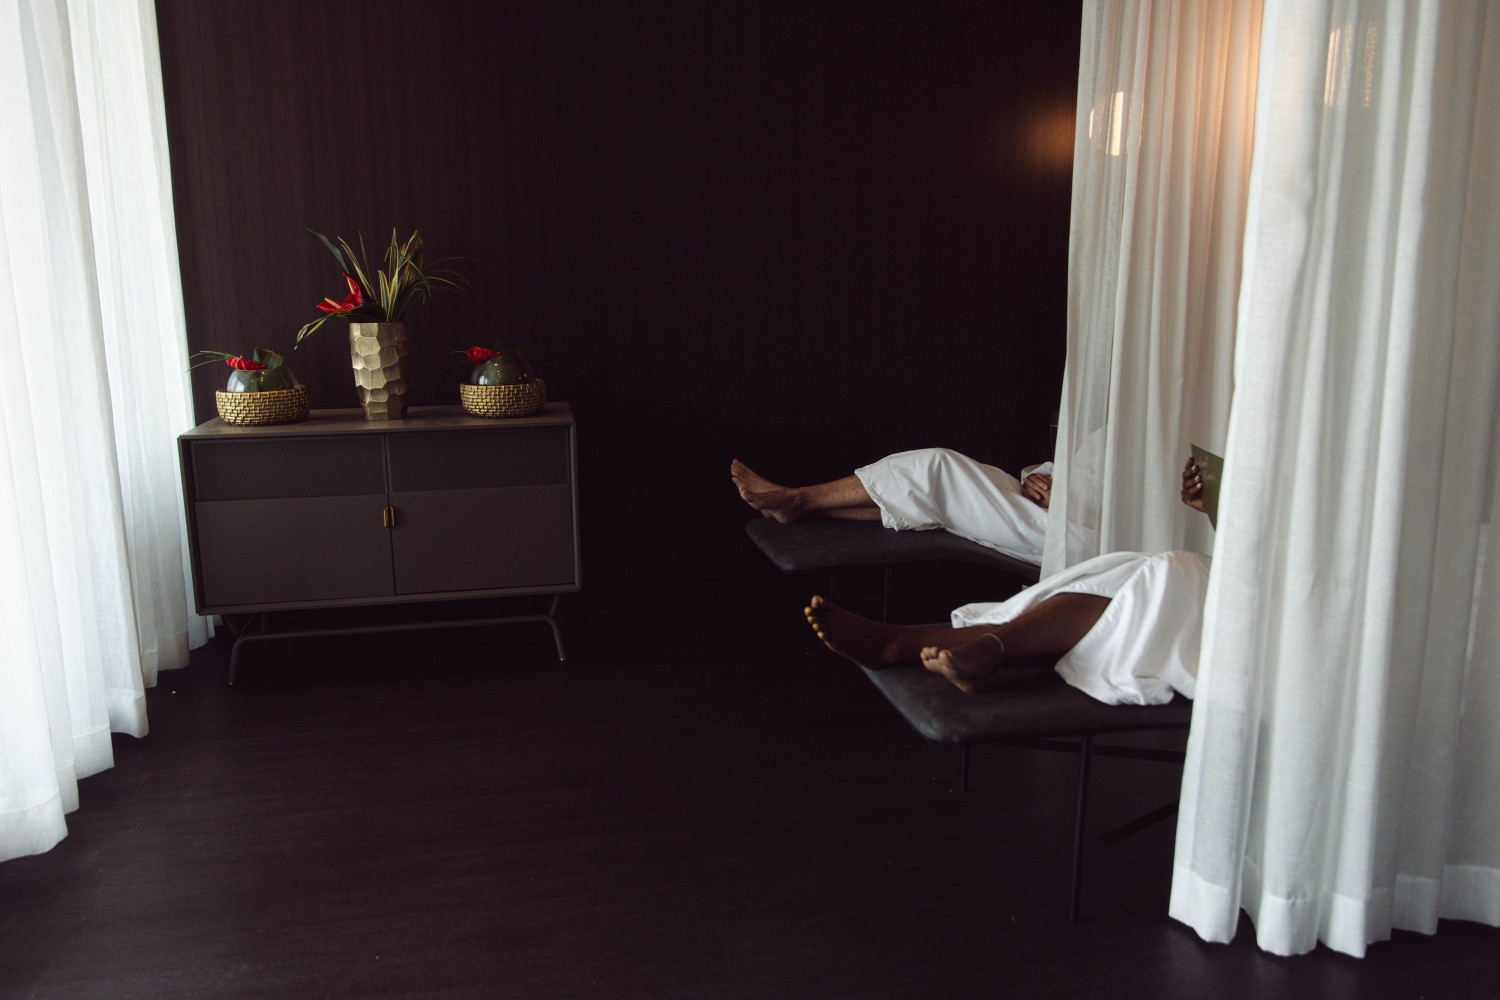 Amway Grand_Celeste Salon & Spa_Relaxation Lounge_Lounge Chairs_Women Sitting in Lounge Chairs_Robes_Cabinet_Flowers